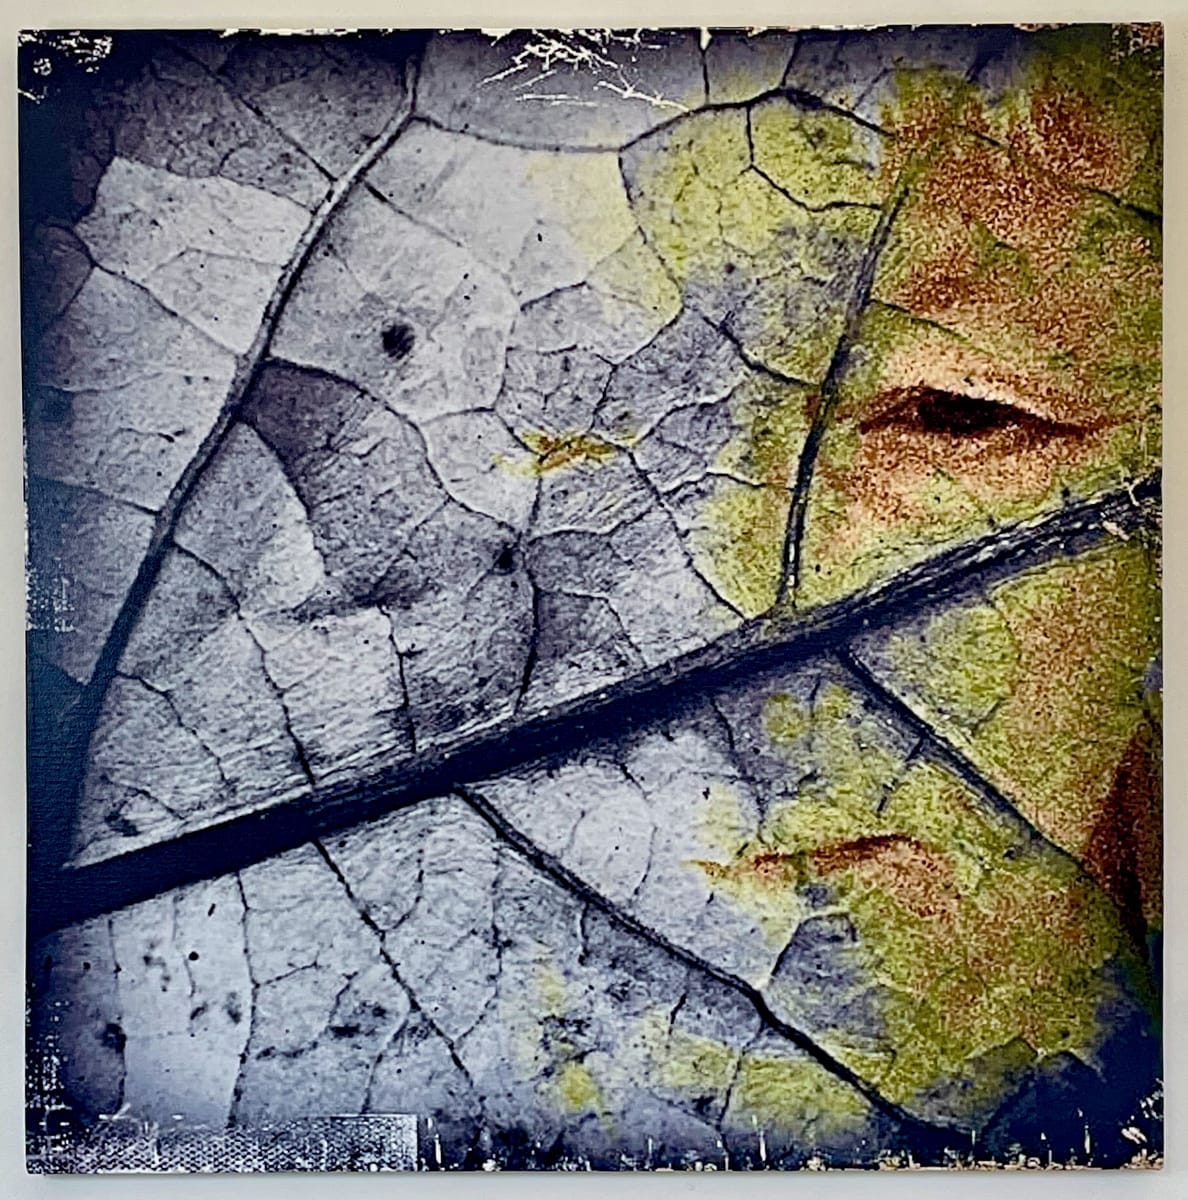 Leaf Life by Susan Detroy  Image: “Leaf Life ” is one creation in my expansive project that emerged from my personal journey in aging. This very large digital to canvas artwork is also in the group of images using leaves as an expression of aging through the metaphor leaves. In addition to sharing the themes in the larger "Portrait of a Woman" project, "Leaving" is an expression of life's transition.
 “Portrait of a Woman” began in 2016 as I continue creating pieces. 
As the largest undertaking in my art career it is an extensive venture encompassing artworks in multiple media.  The origin of the project grew from my personal journey in aging, using my own face. Pieces incorporate my face with natural elements. After six years now the pieces in this collection include canvas, metal and paper prints as well as a few small experimentations. 